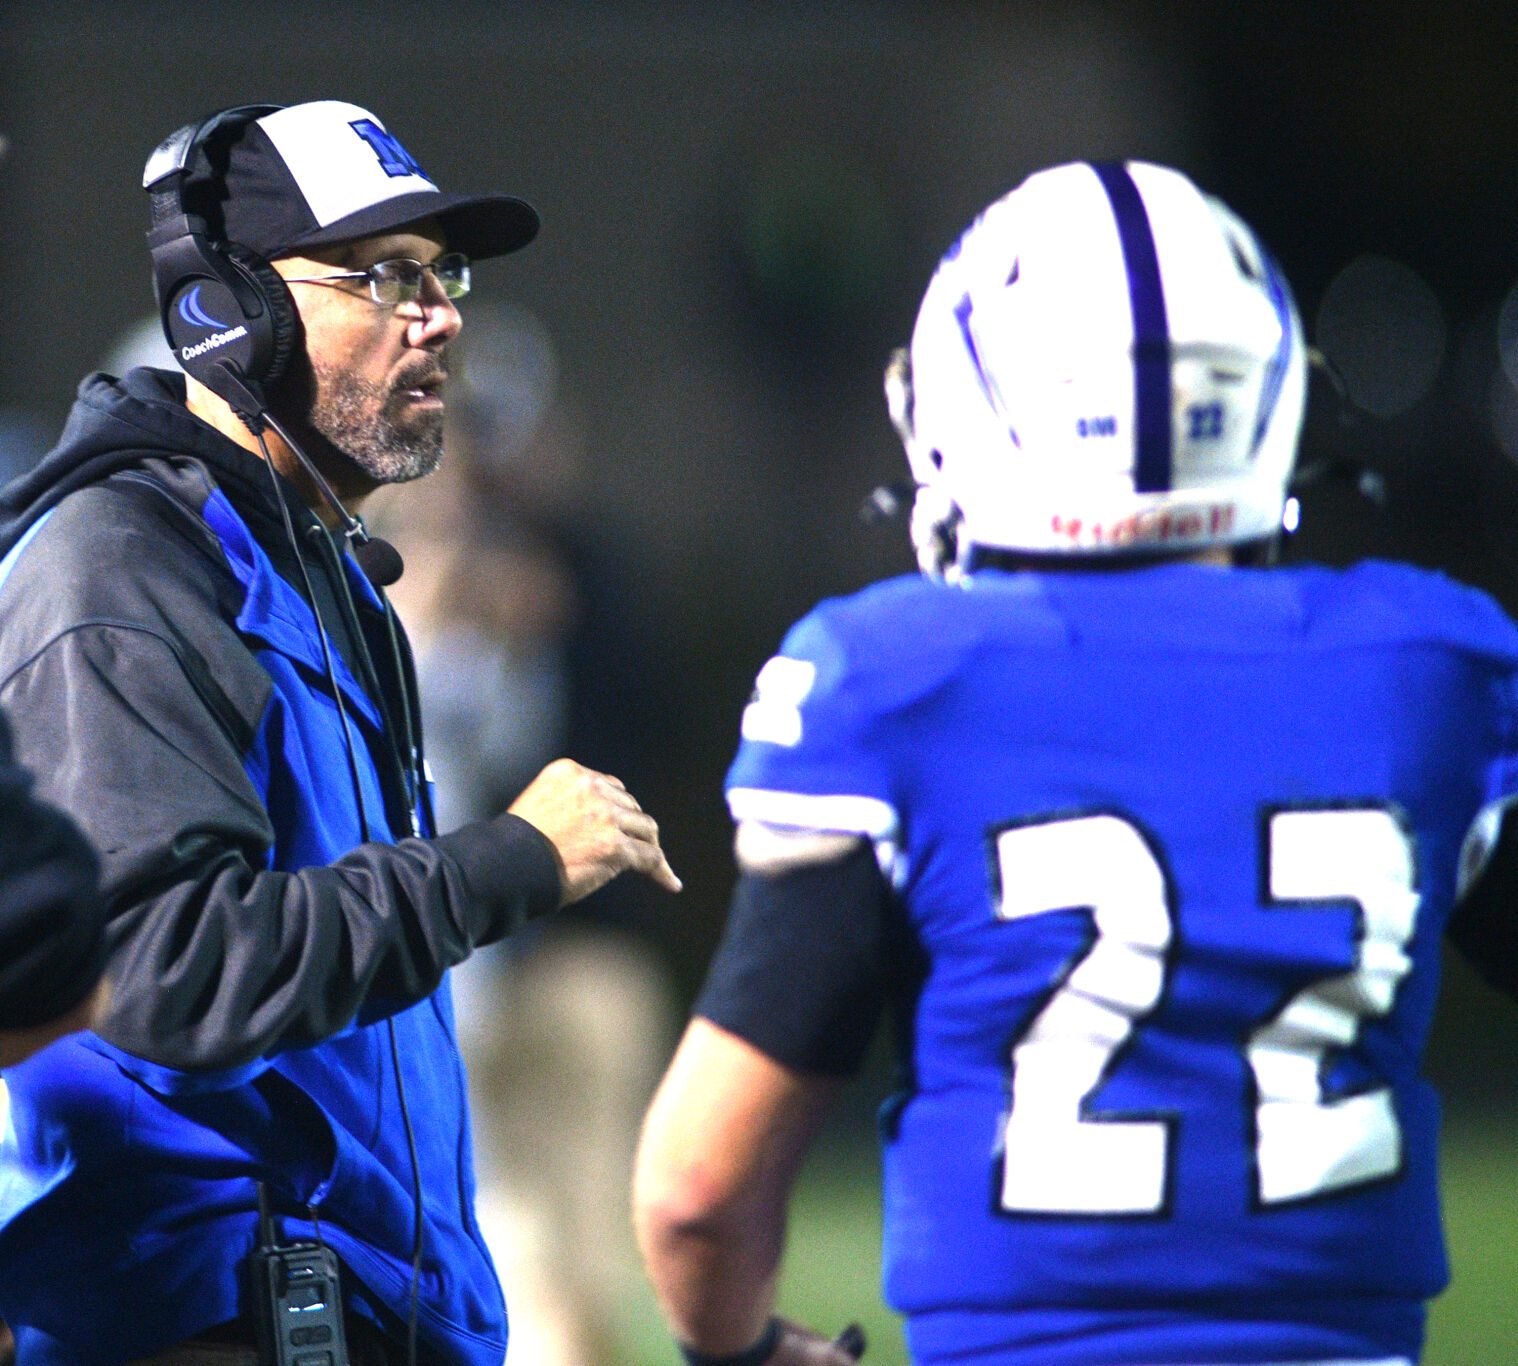 Madison’s Mike Gilligan Named Division III State Coach of the Year, Geneva Eagles’ Players Receive All-Ohio Team Selections